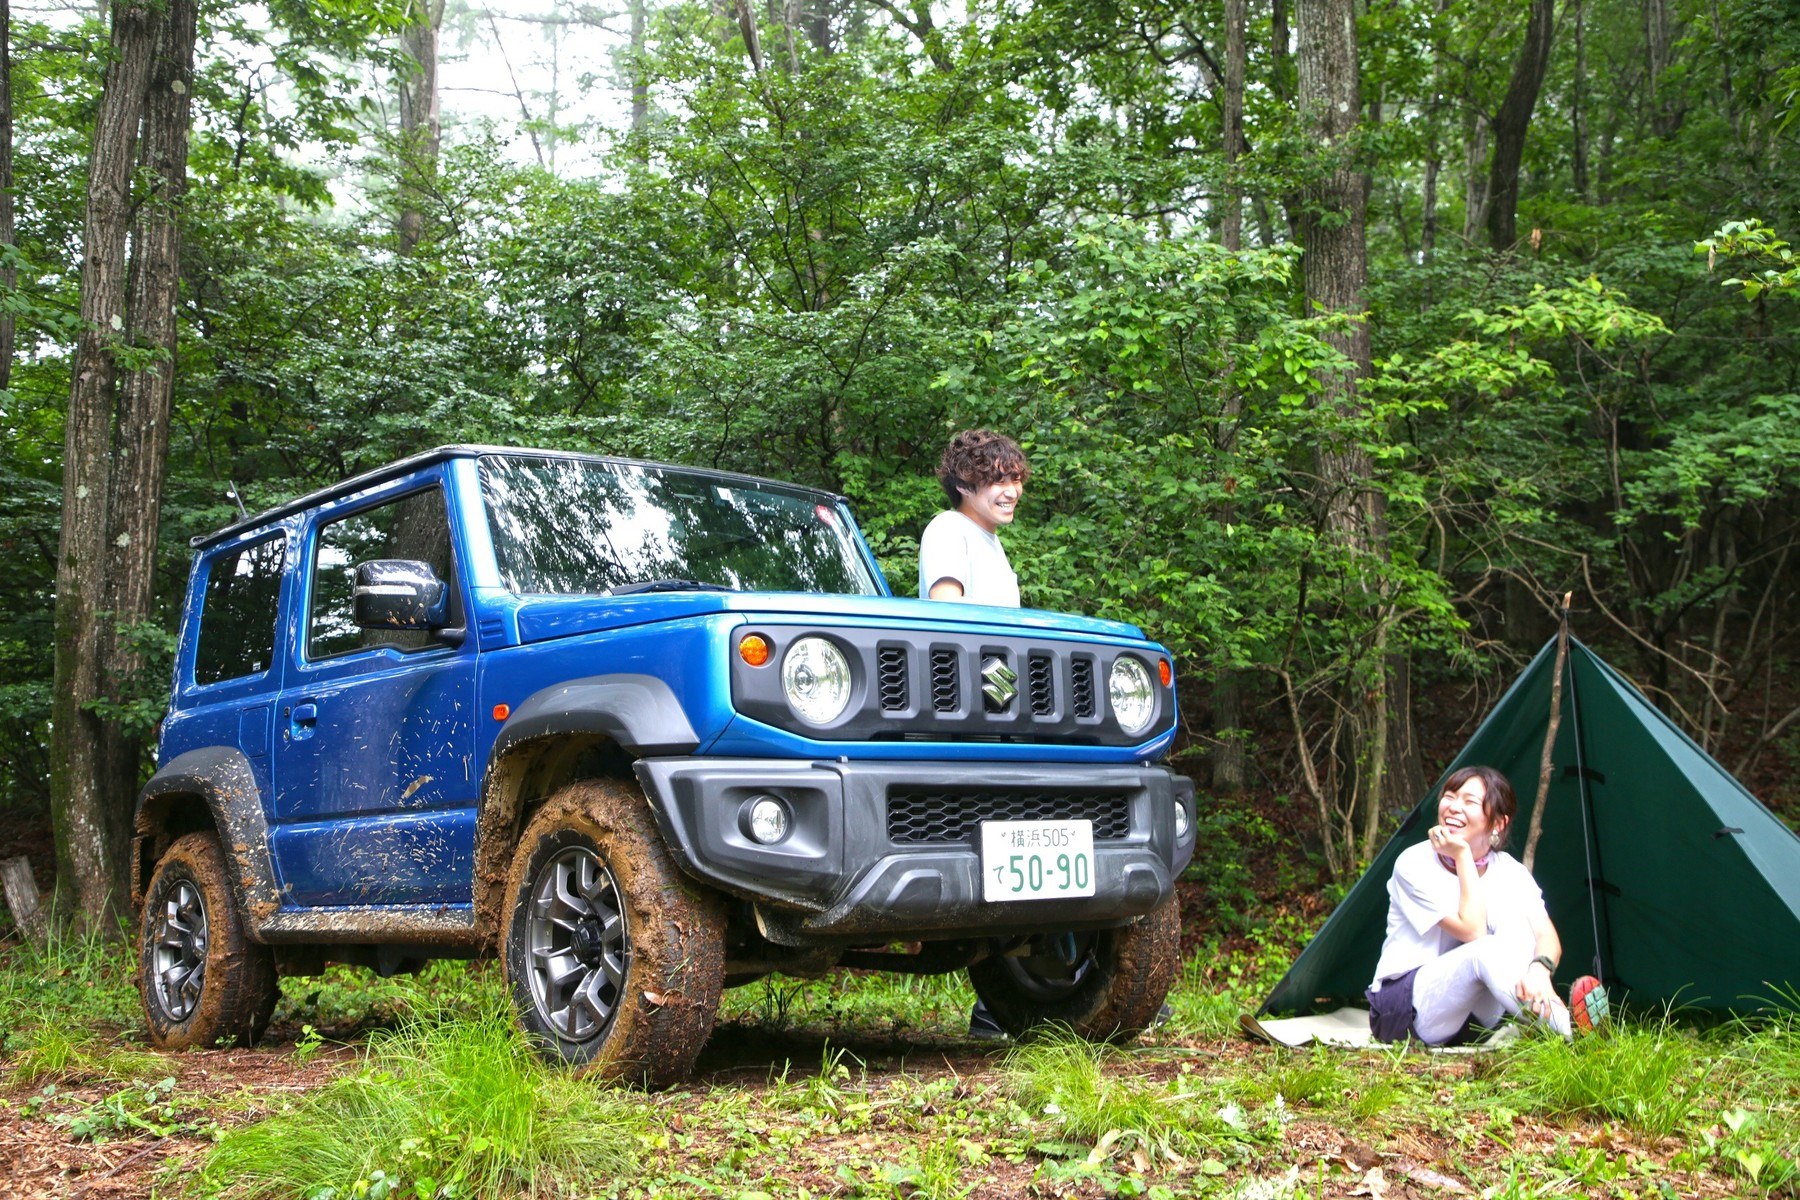 Mk4 Suzuki Jimny A Massive Hit Customers Waiting 10 Months For Deliveries